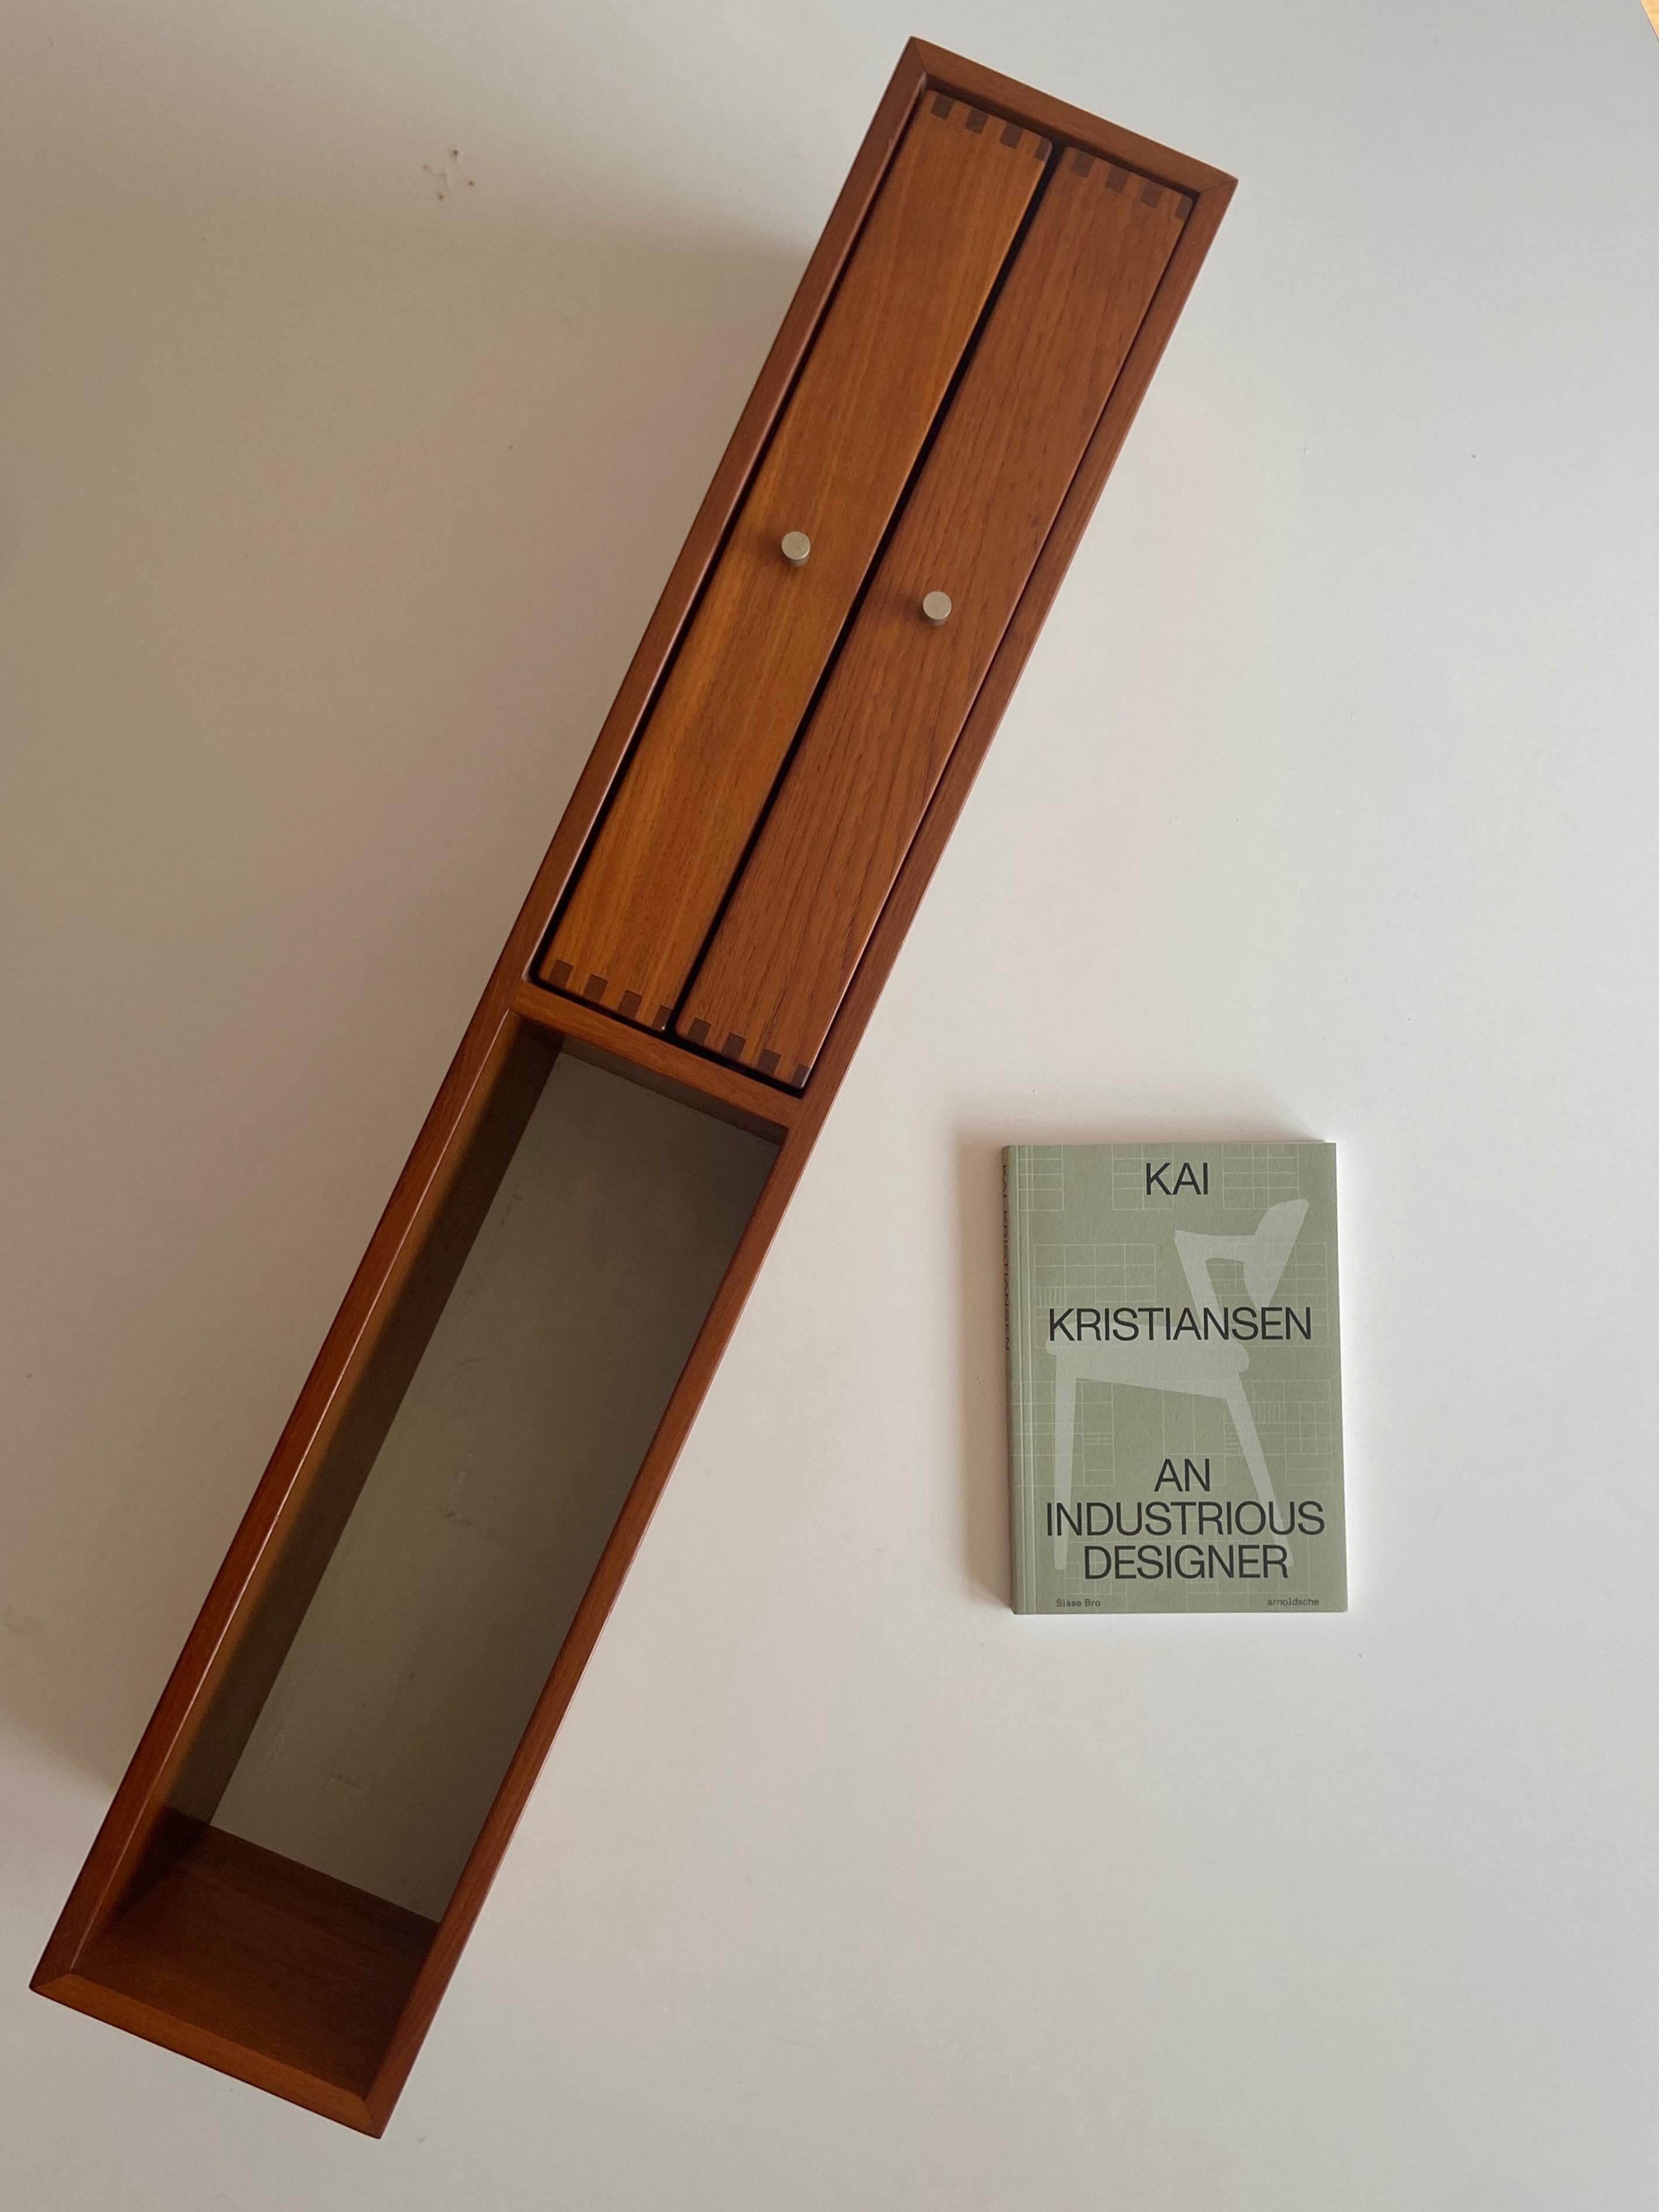 1960s Teak wall board / teak wood hanging shelf no. 132 designed by Kai Kristiansen and signed/produced by cabinetmaker Aksel Kjaersgaard, Odder Made in Denmark.
With two drawers.

  
 